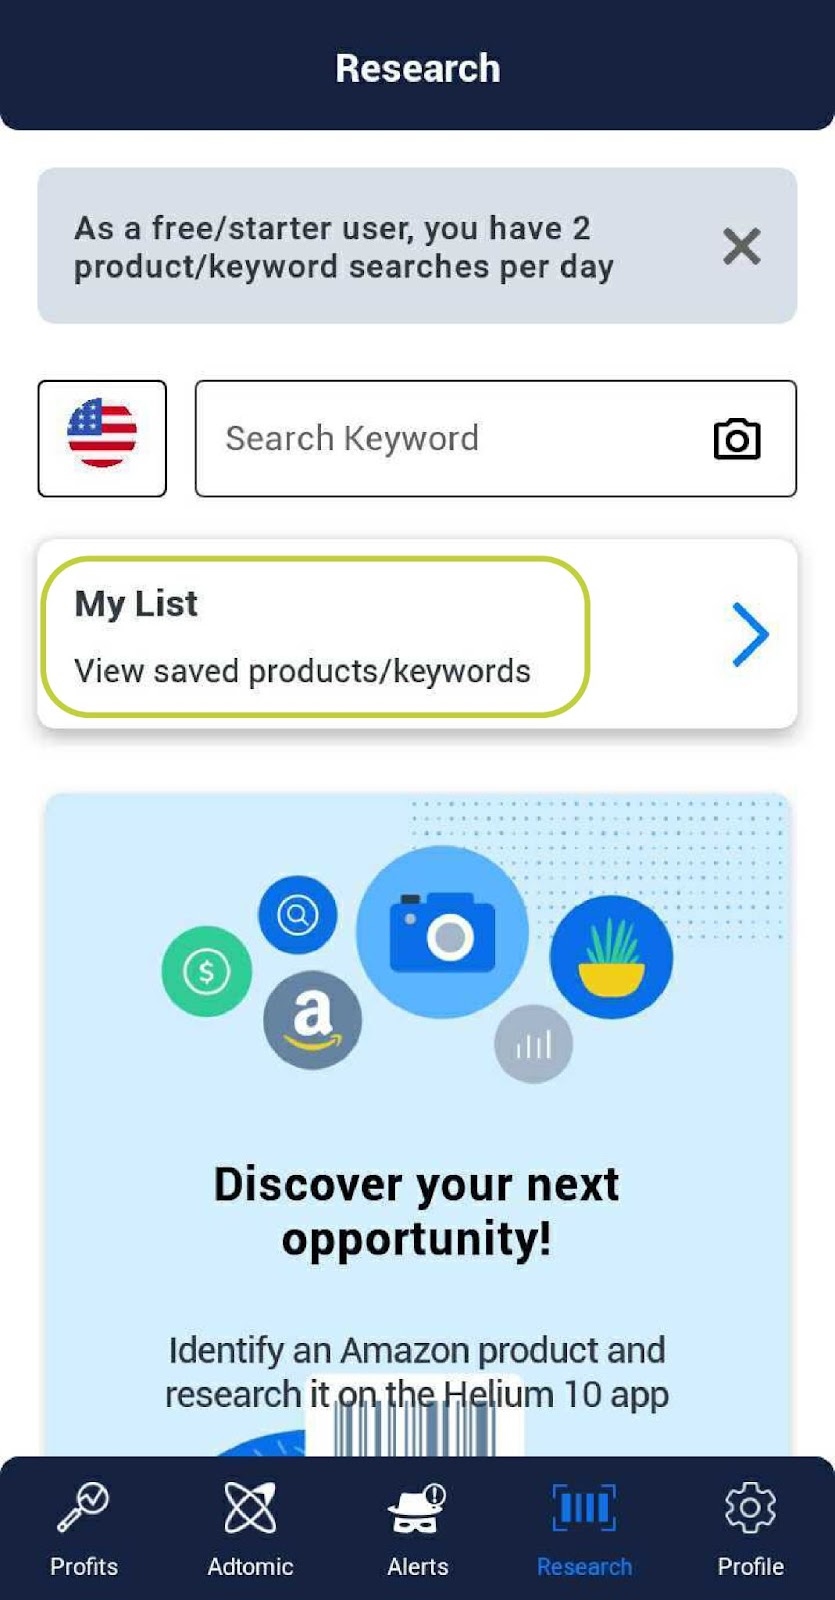 You can store your usual keywords and products in My List